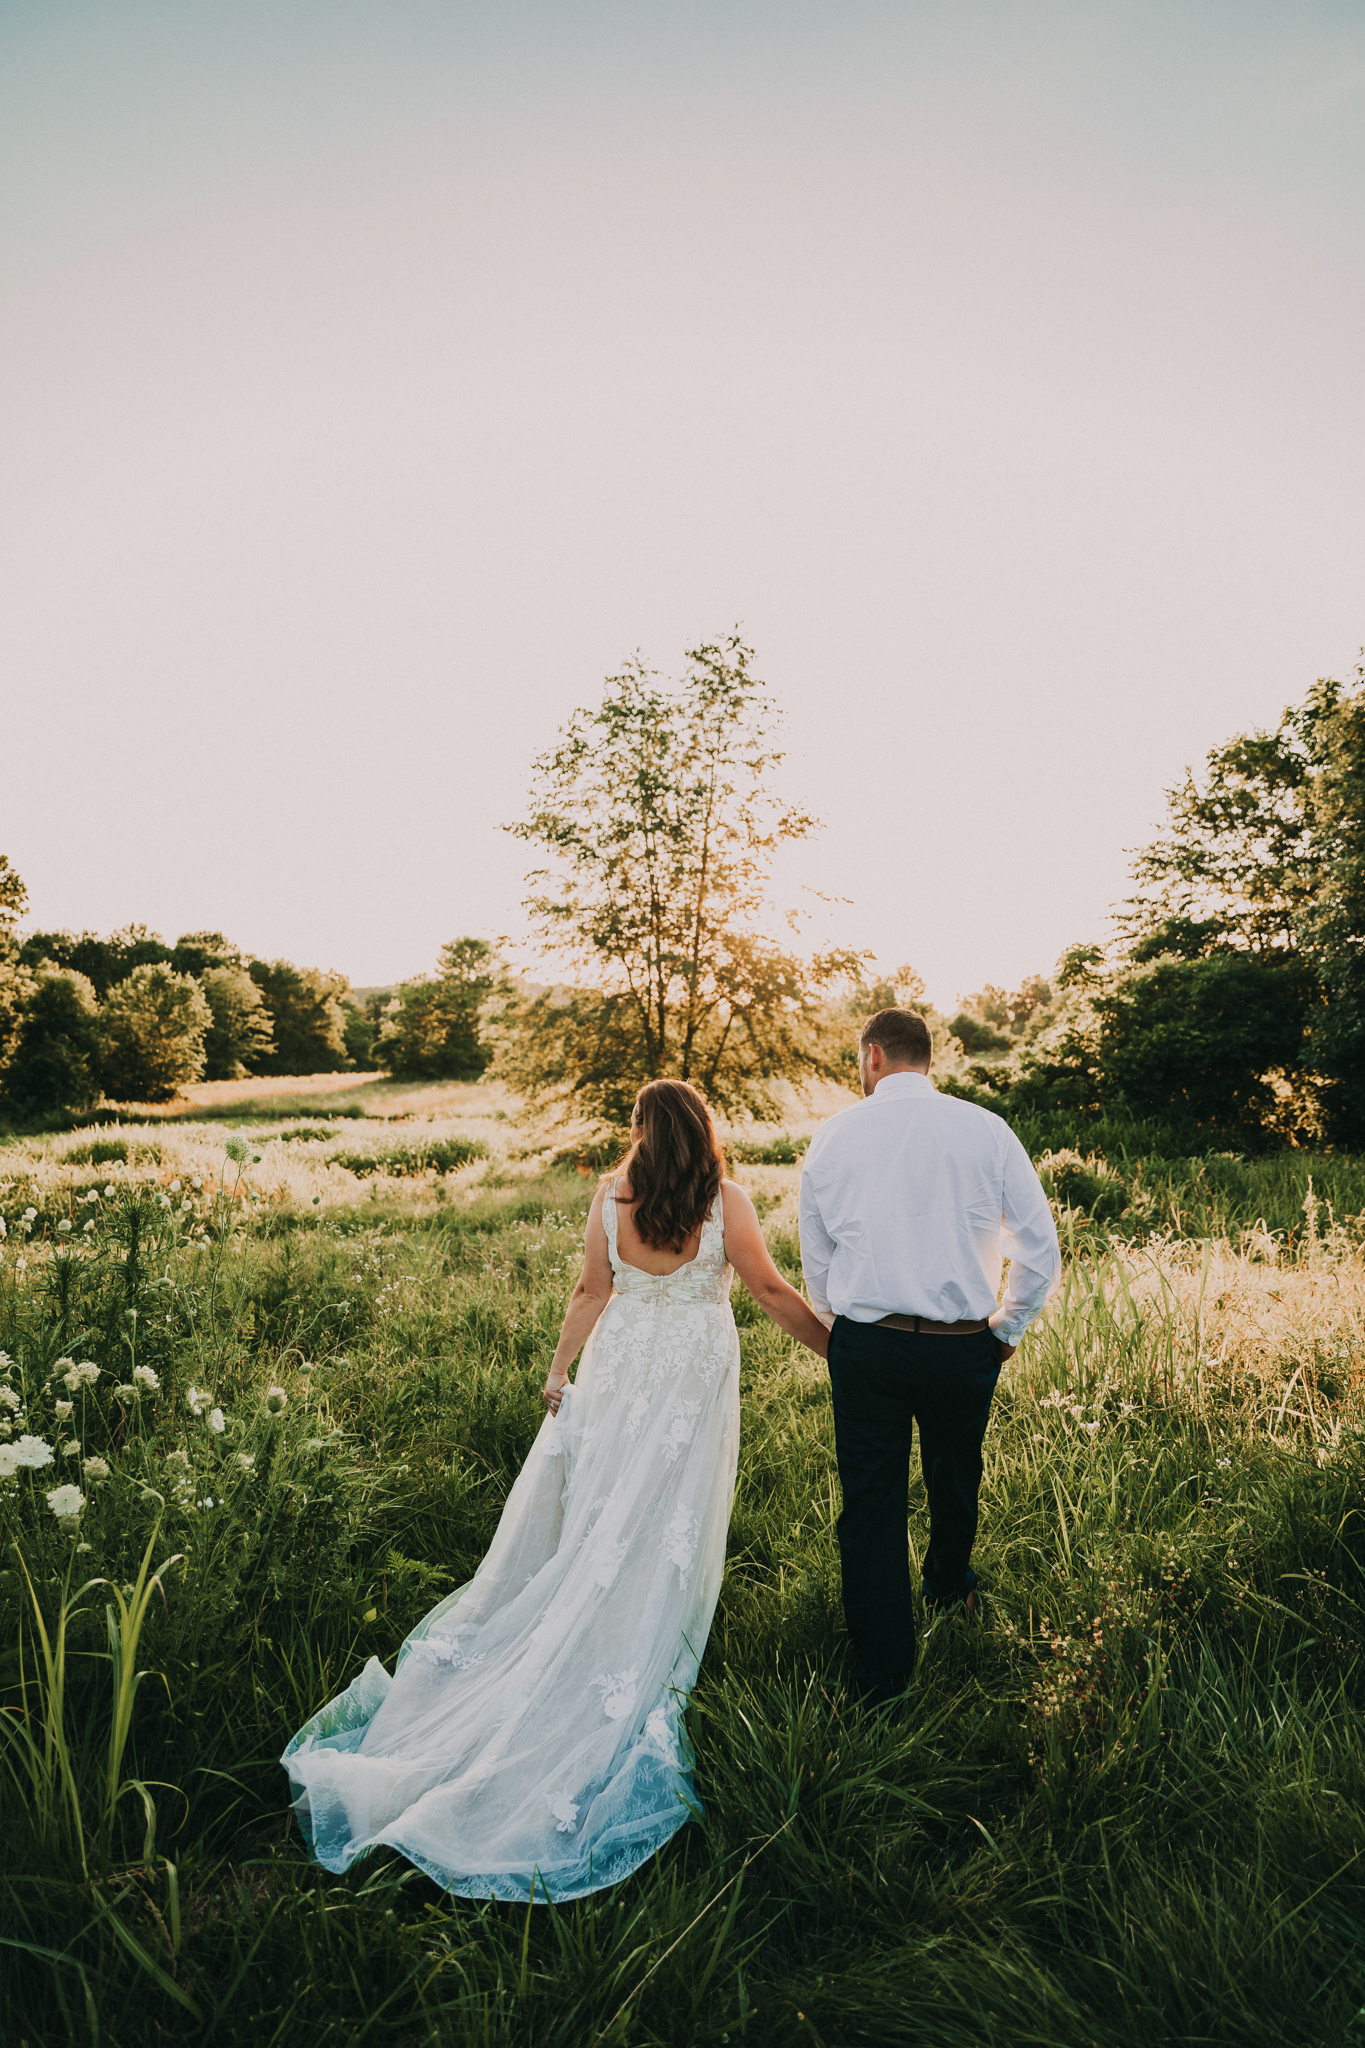 Flower Farm Styled Shoot by Billie-Shaye Style featured on Nashville Bride Guide